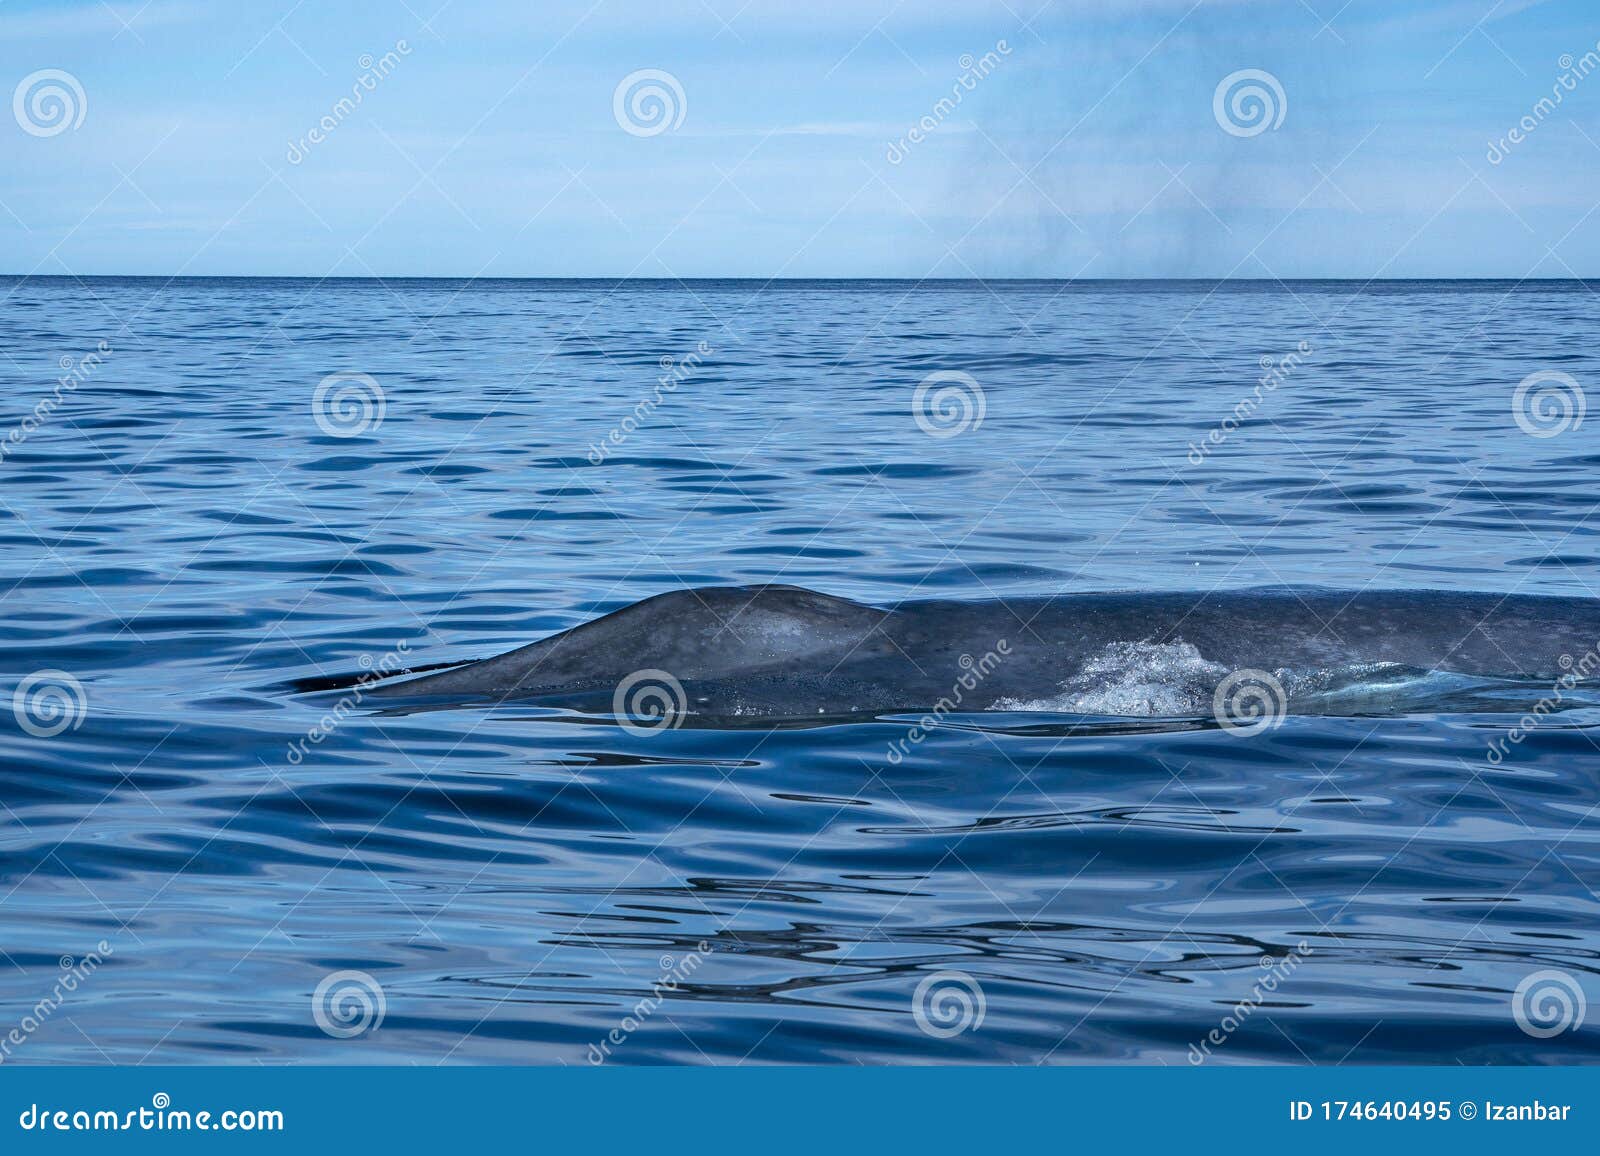 Blue Whale the Biggest Animal in the World Tail Detail Stock Image - Image  of ocean, fluke: 174640495